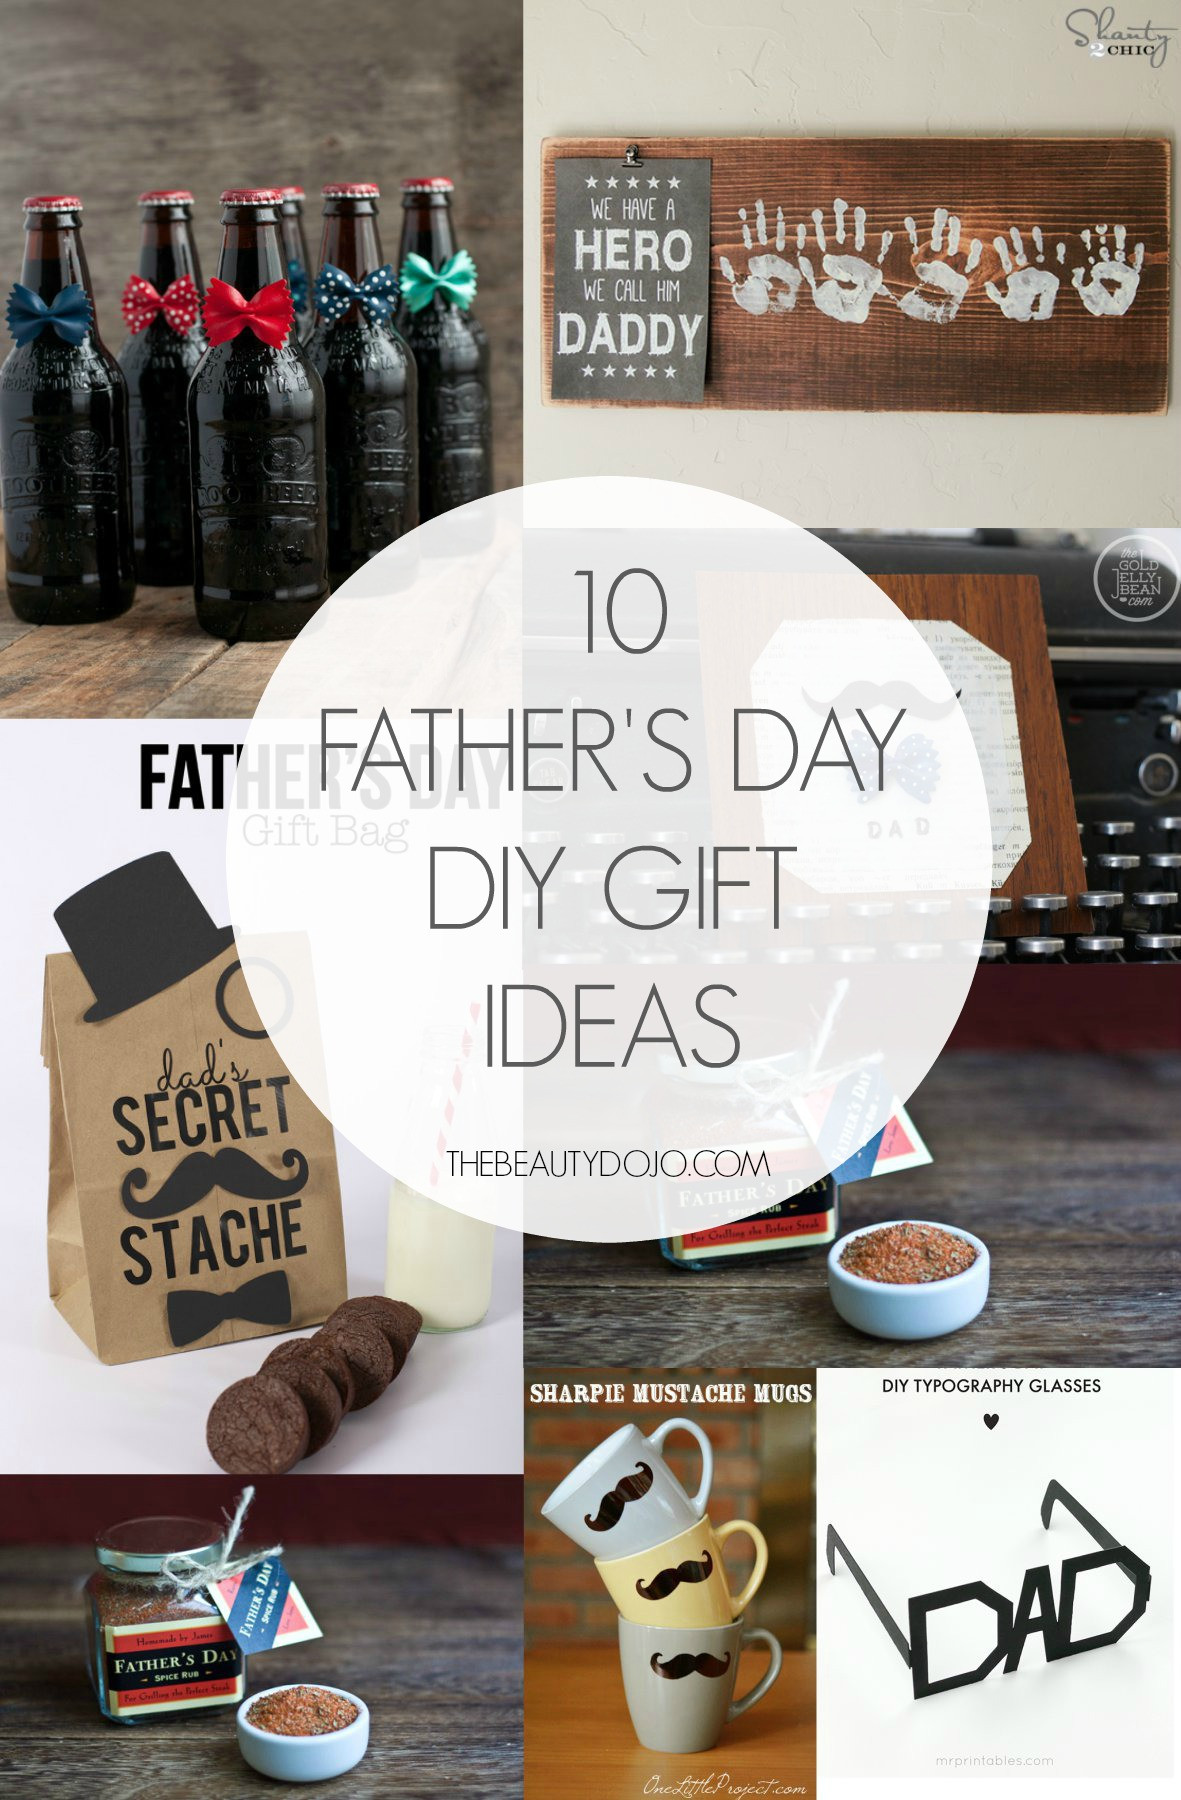 Fathers Day Diy Ideas
 10 Father s Day DIY Gift Ideas The Beautydojo